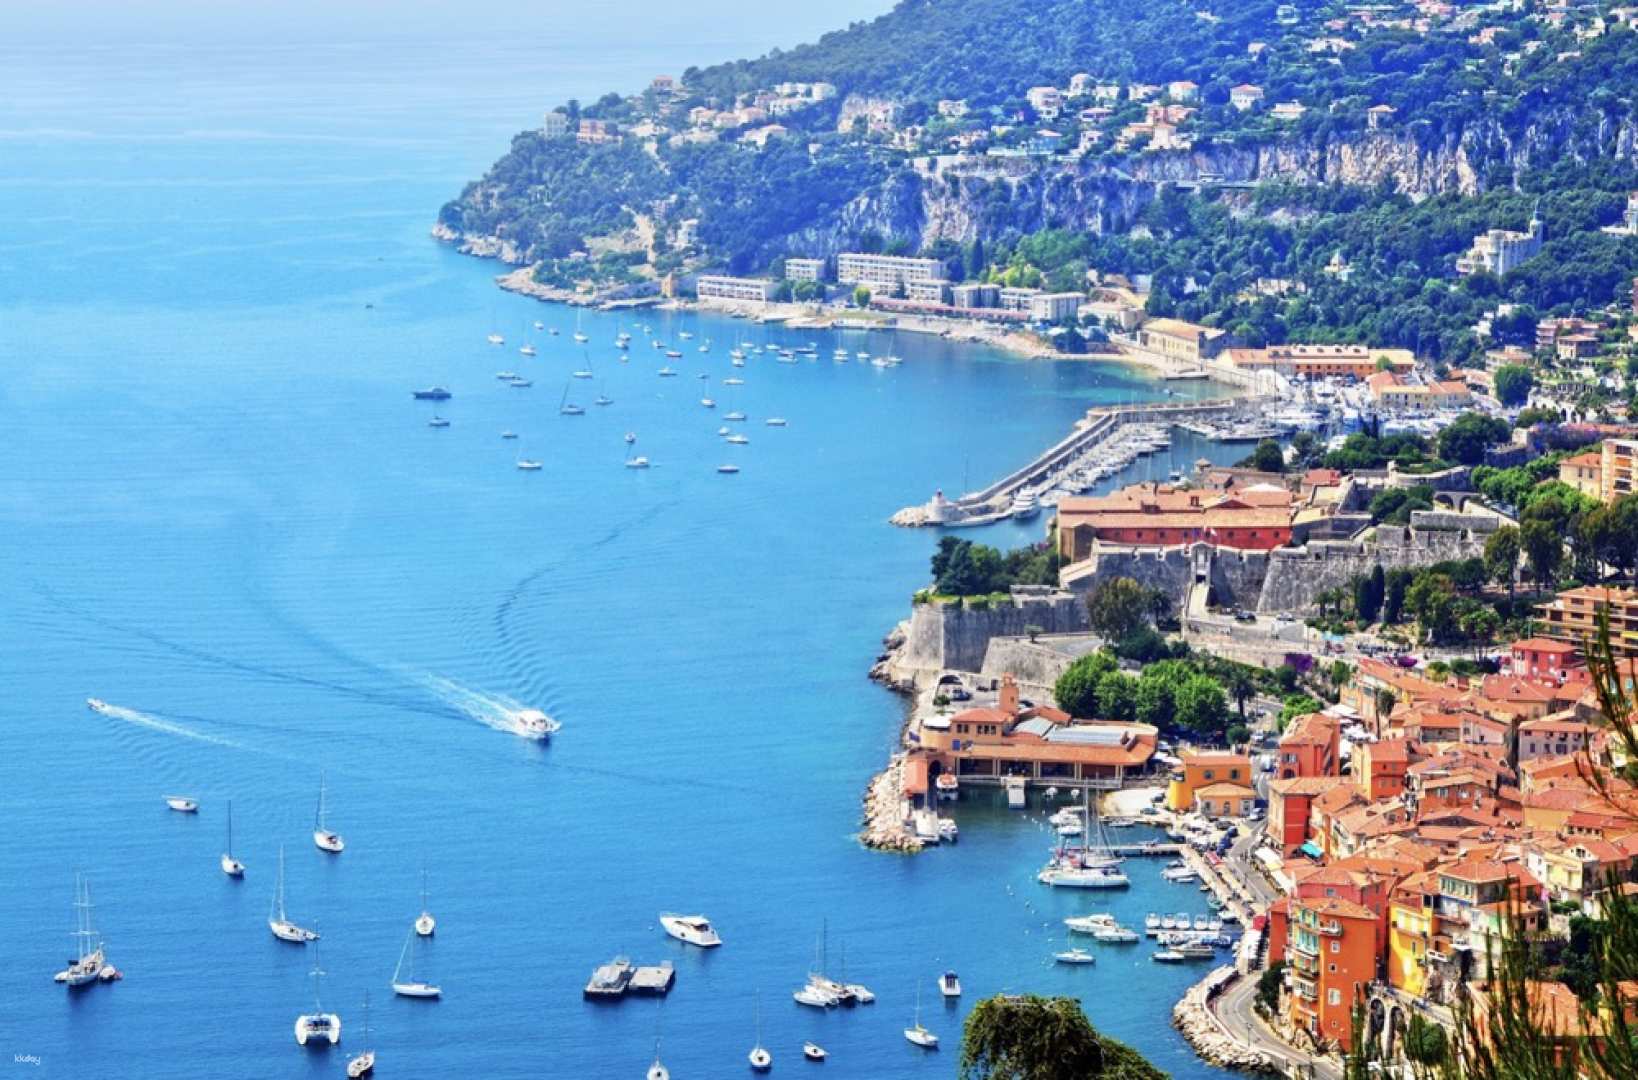 [Exclusive chartered car] French town of Nice-Eze, Monaco (Monaco Royal Palace), Menton customized one-day tour with Chinese-speaking driver